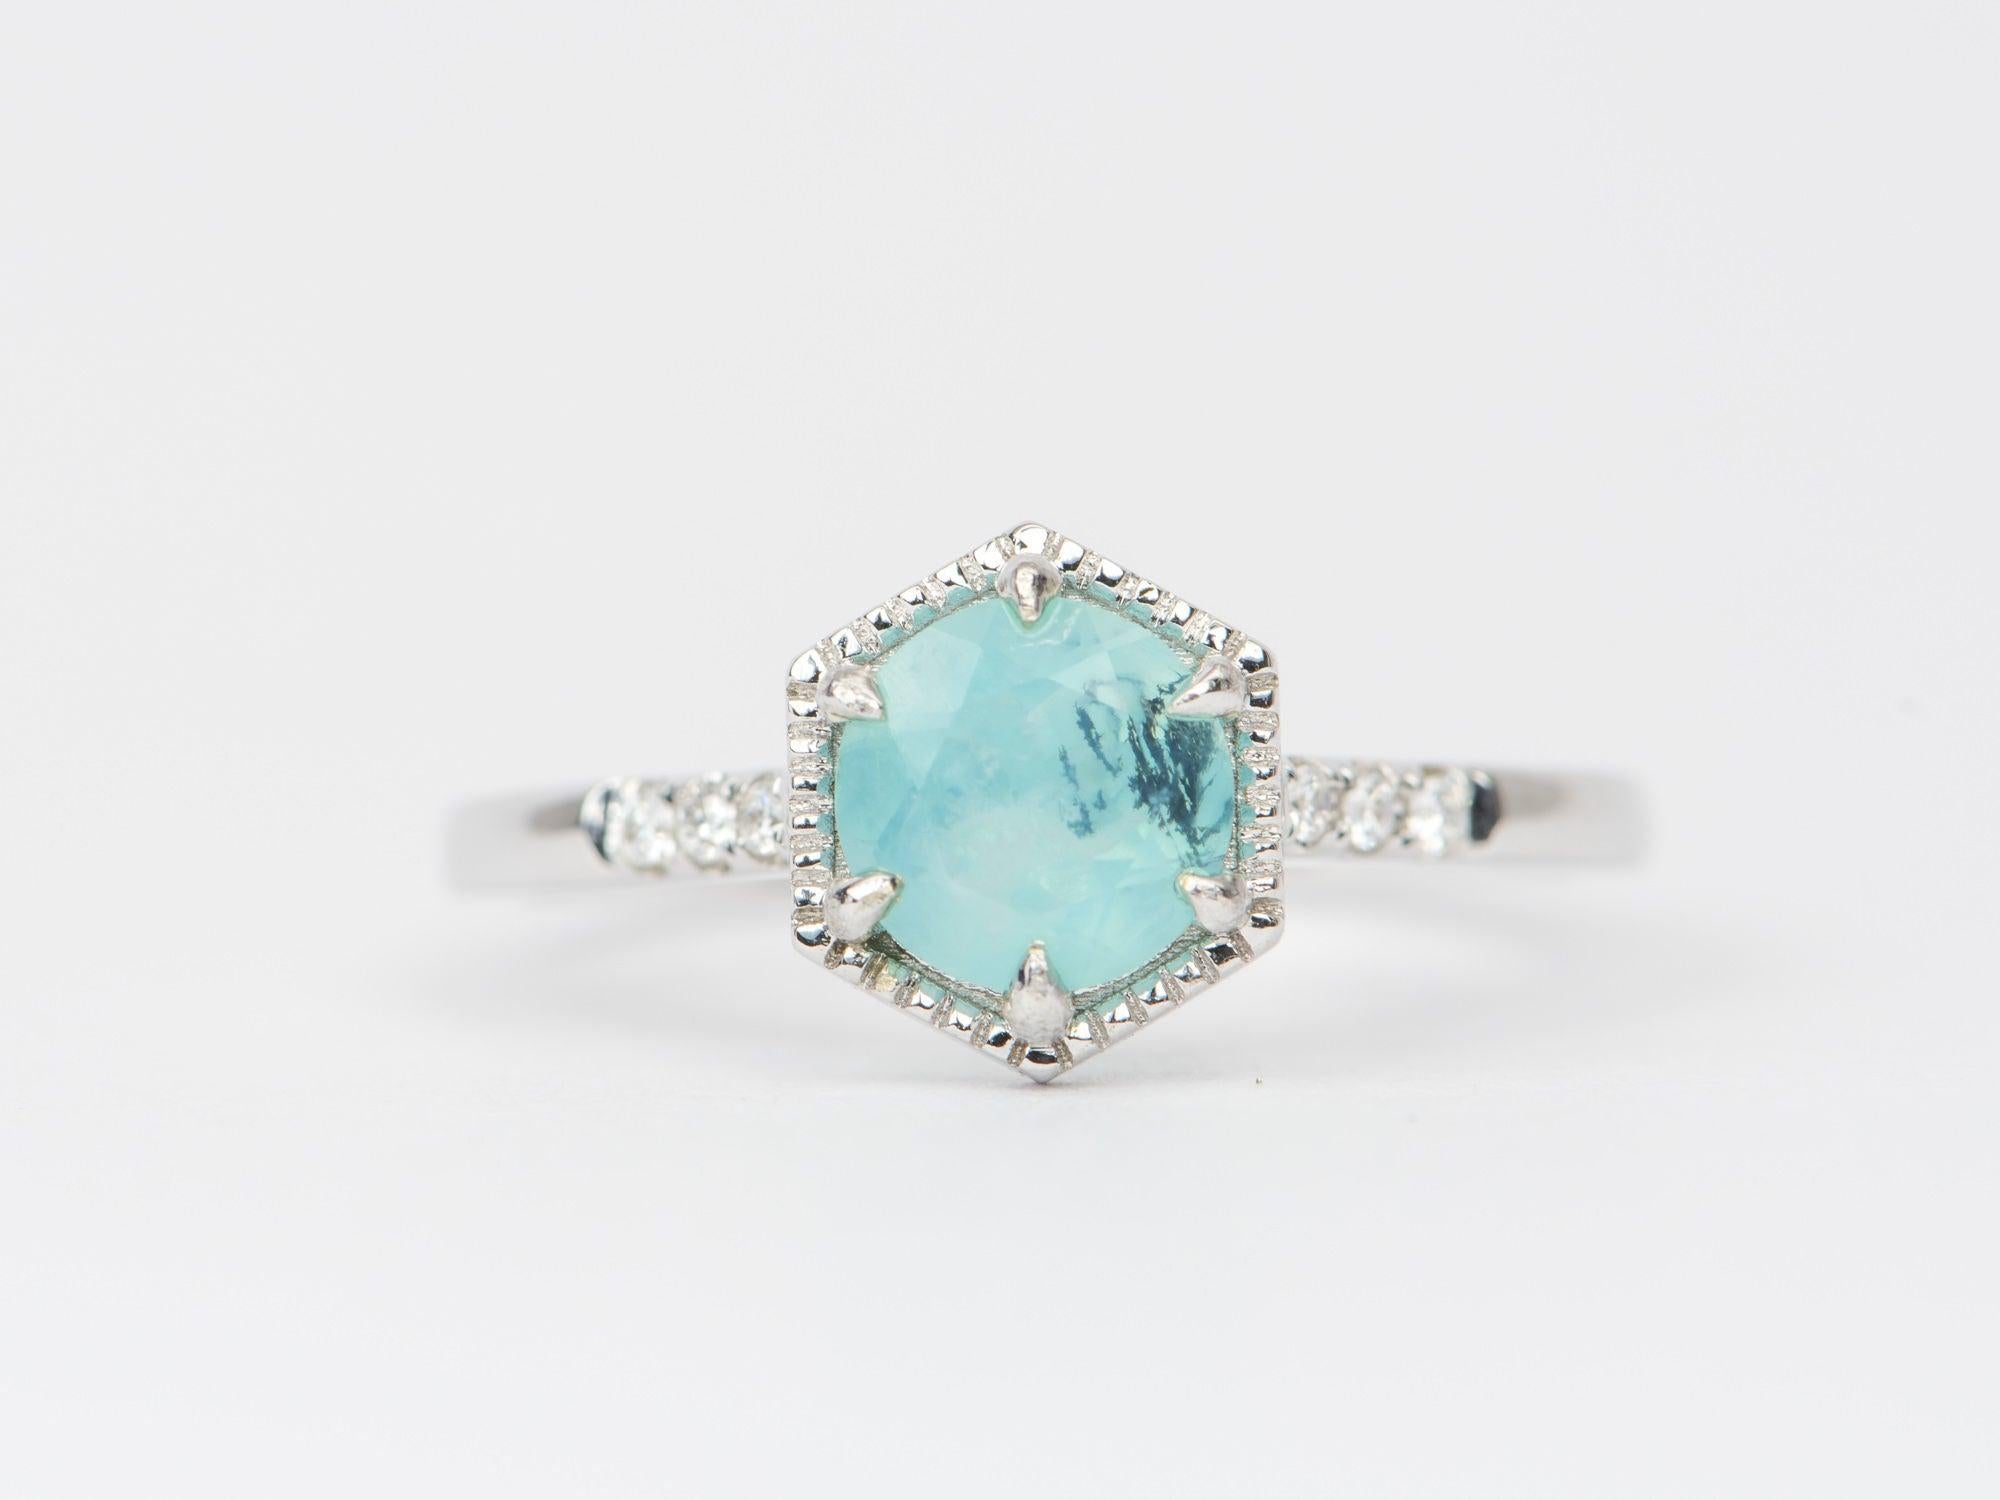 ♥ Peruvian Blue Opal Hexagon Setting 14K White Gold Engagement Ring AD1462-14
♥ Solid 14k white gold ring set with a beautiful round-shaped opal
♥ Gorgeous blue color!
♥ The item measures in length, in width, and stands from the finger

 

♥ US Size